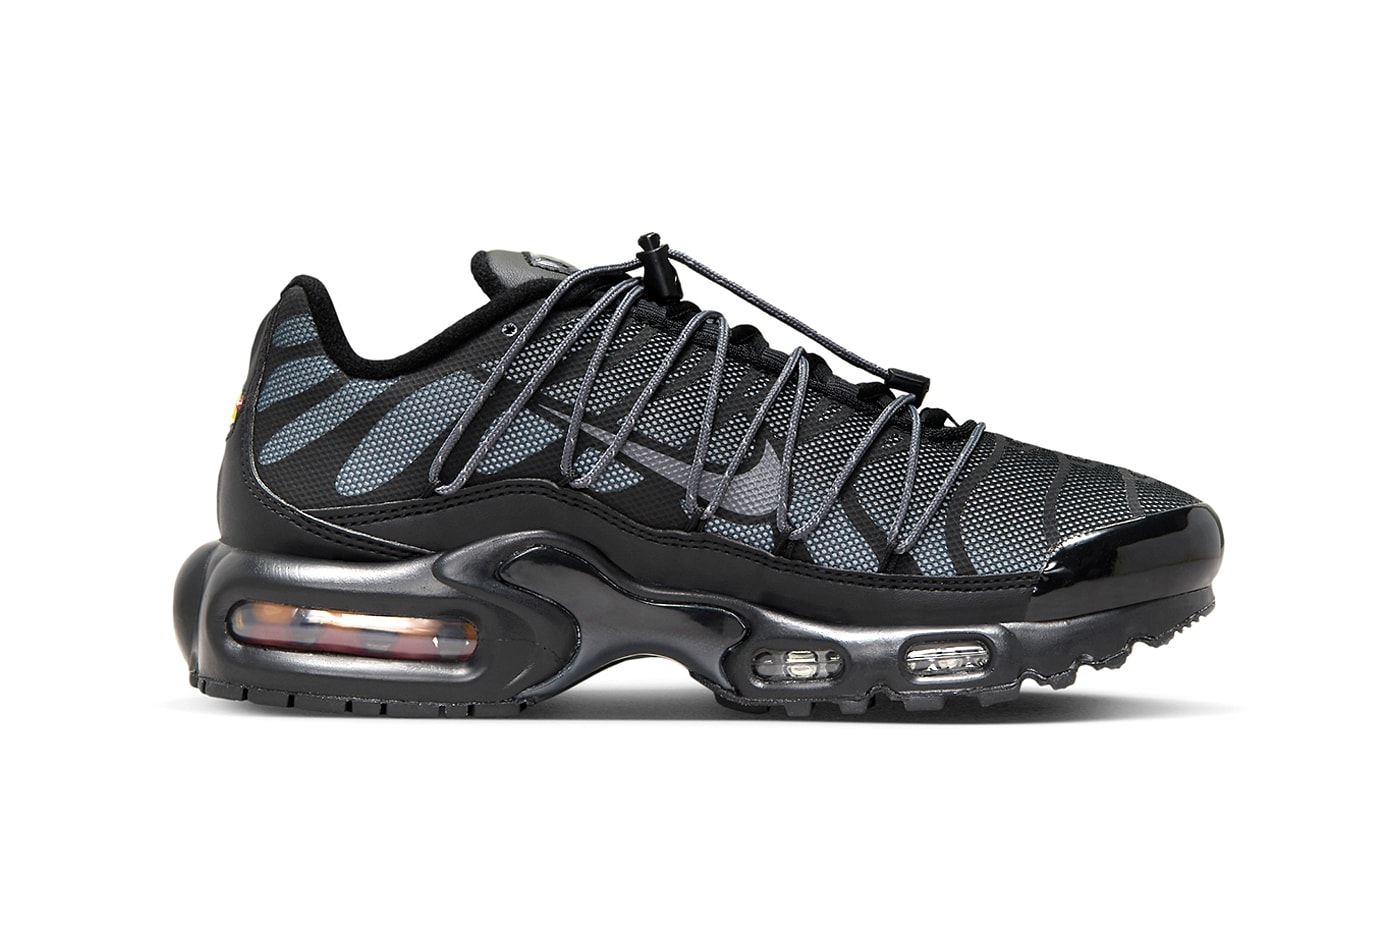 Nike Air Max Plus Toggle Laces "Black/Metallic Silver" FZ2770-001 nike technical sneakers everyday swoosh